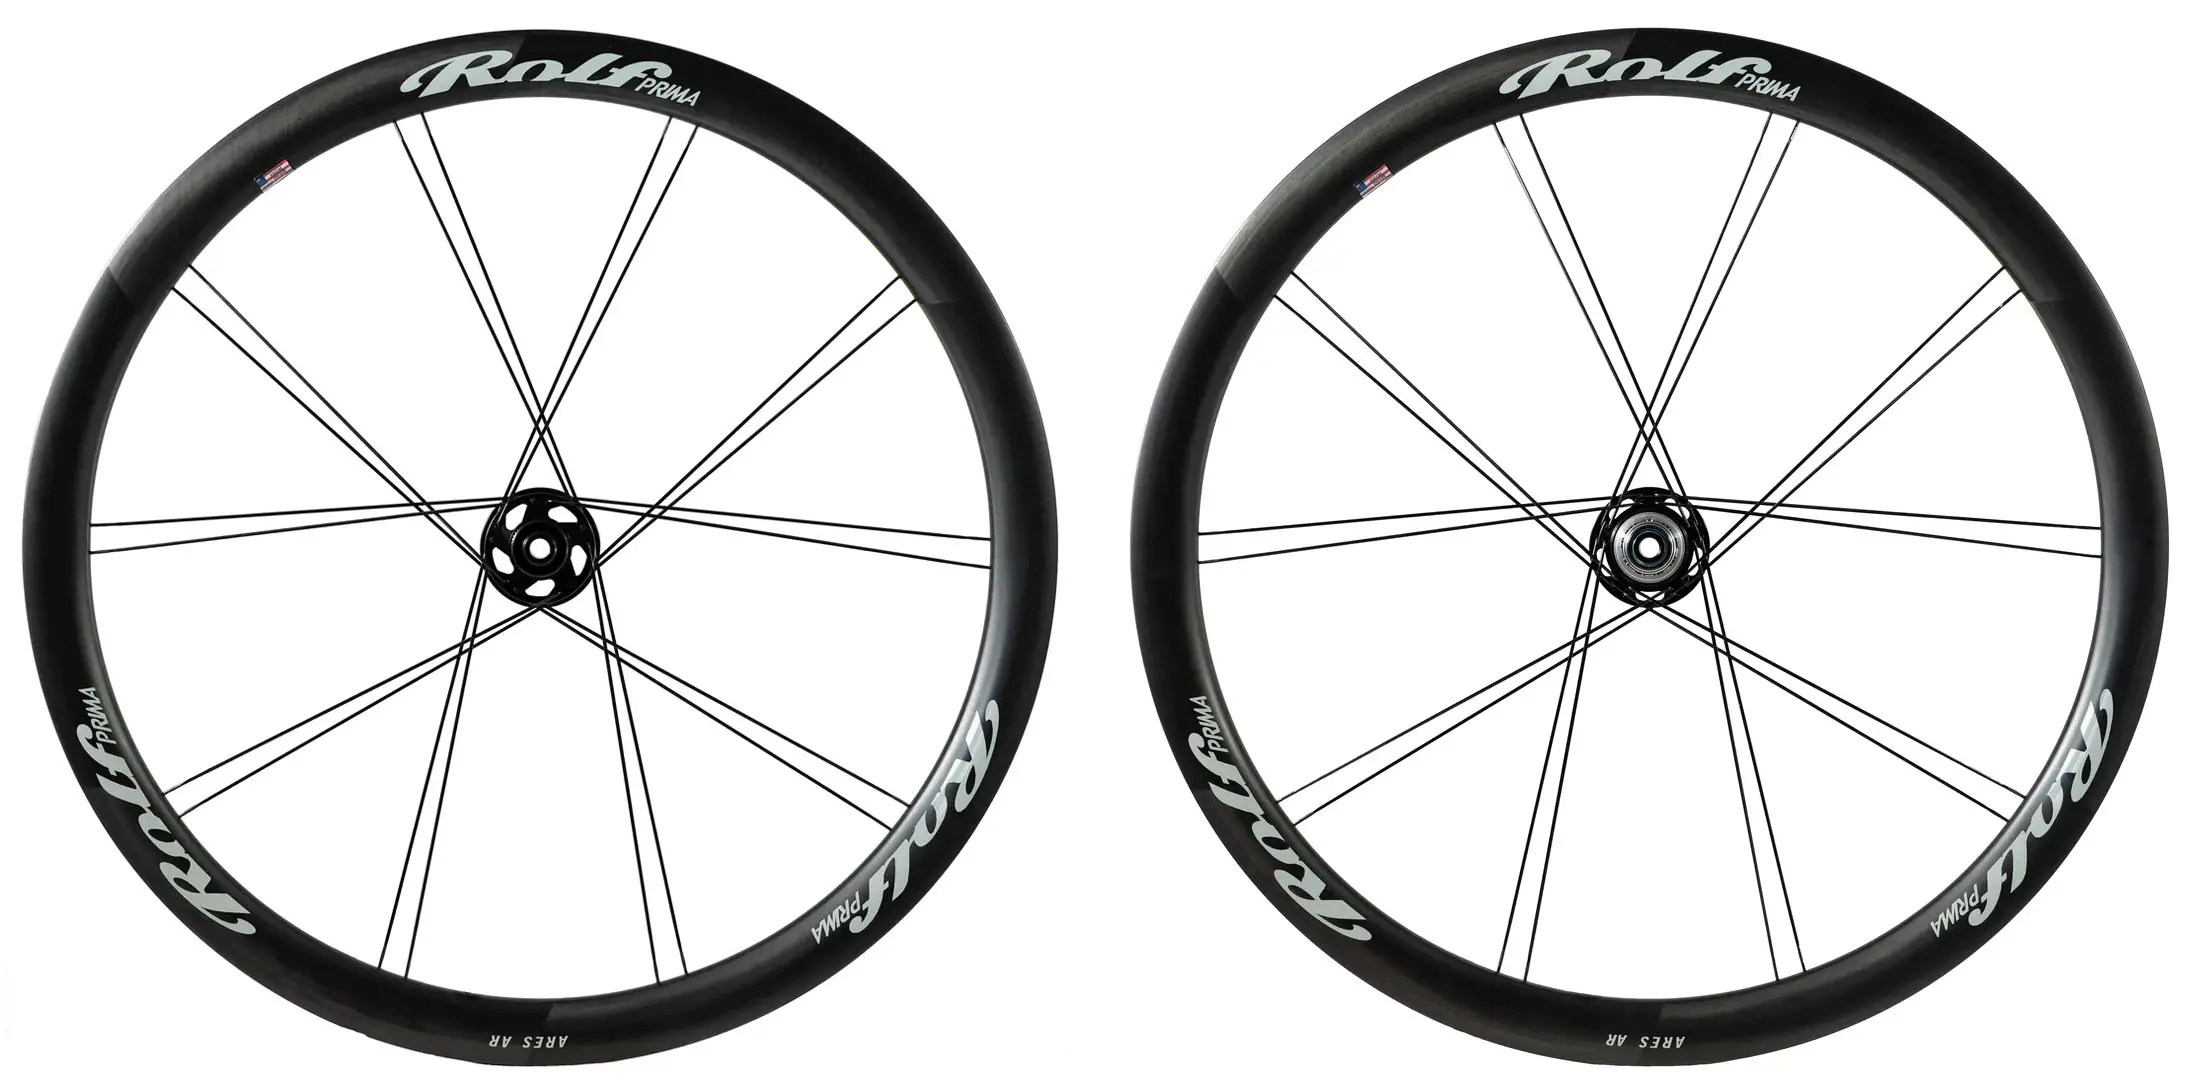 Rolf Prima Ares4 AR pairs paired spokes with wider rims